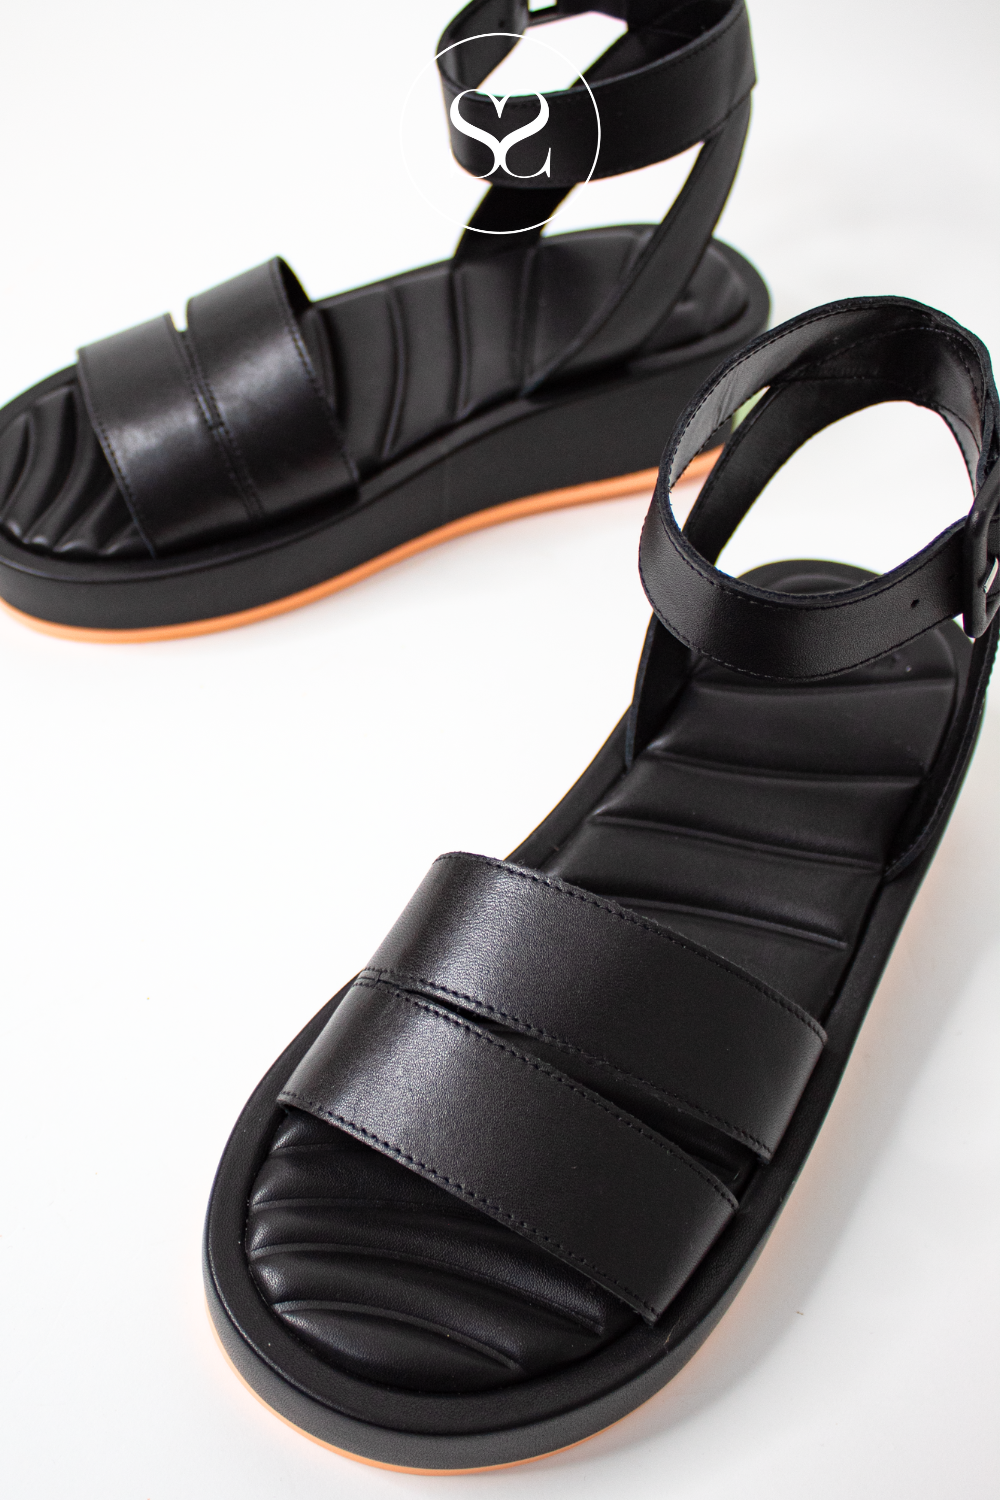 CHUNKY BLACK SANDALS WITH FLATFORM FOR WOMEN